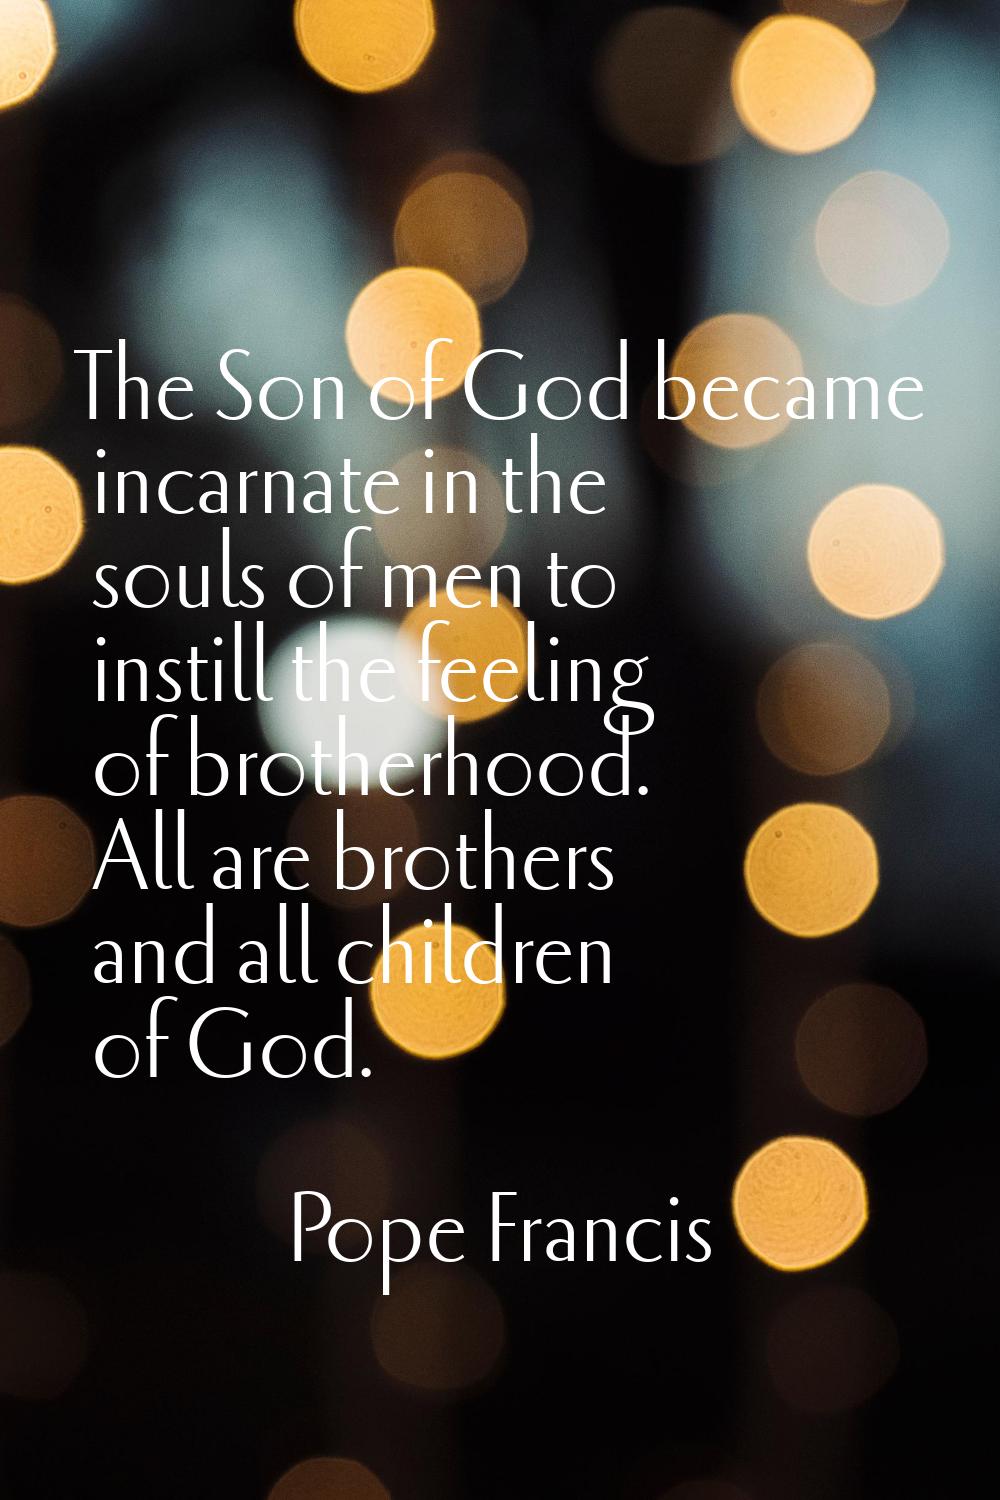 The Son of God became incarnate in the souls of men to instill the feeling of brotherhood. All are 